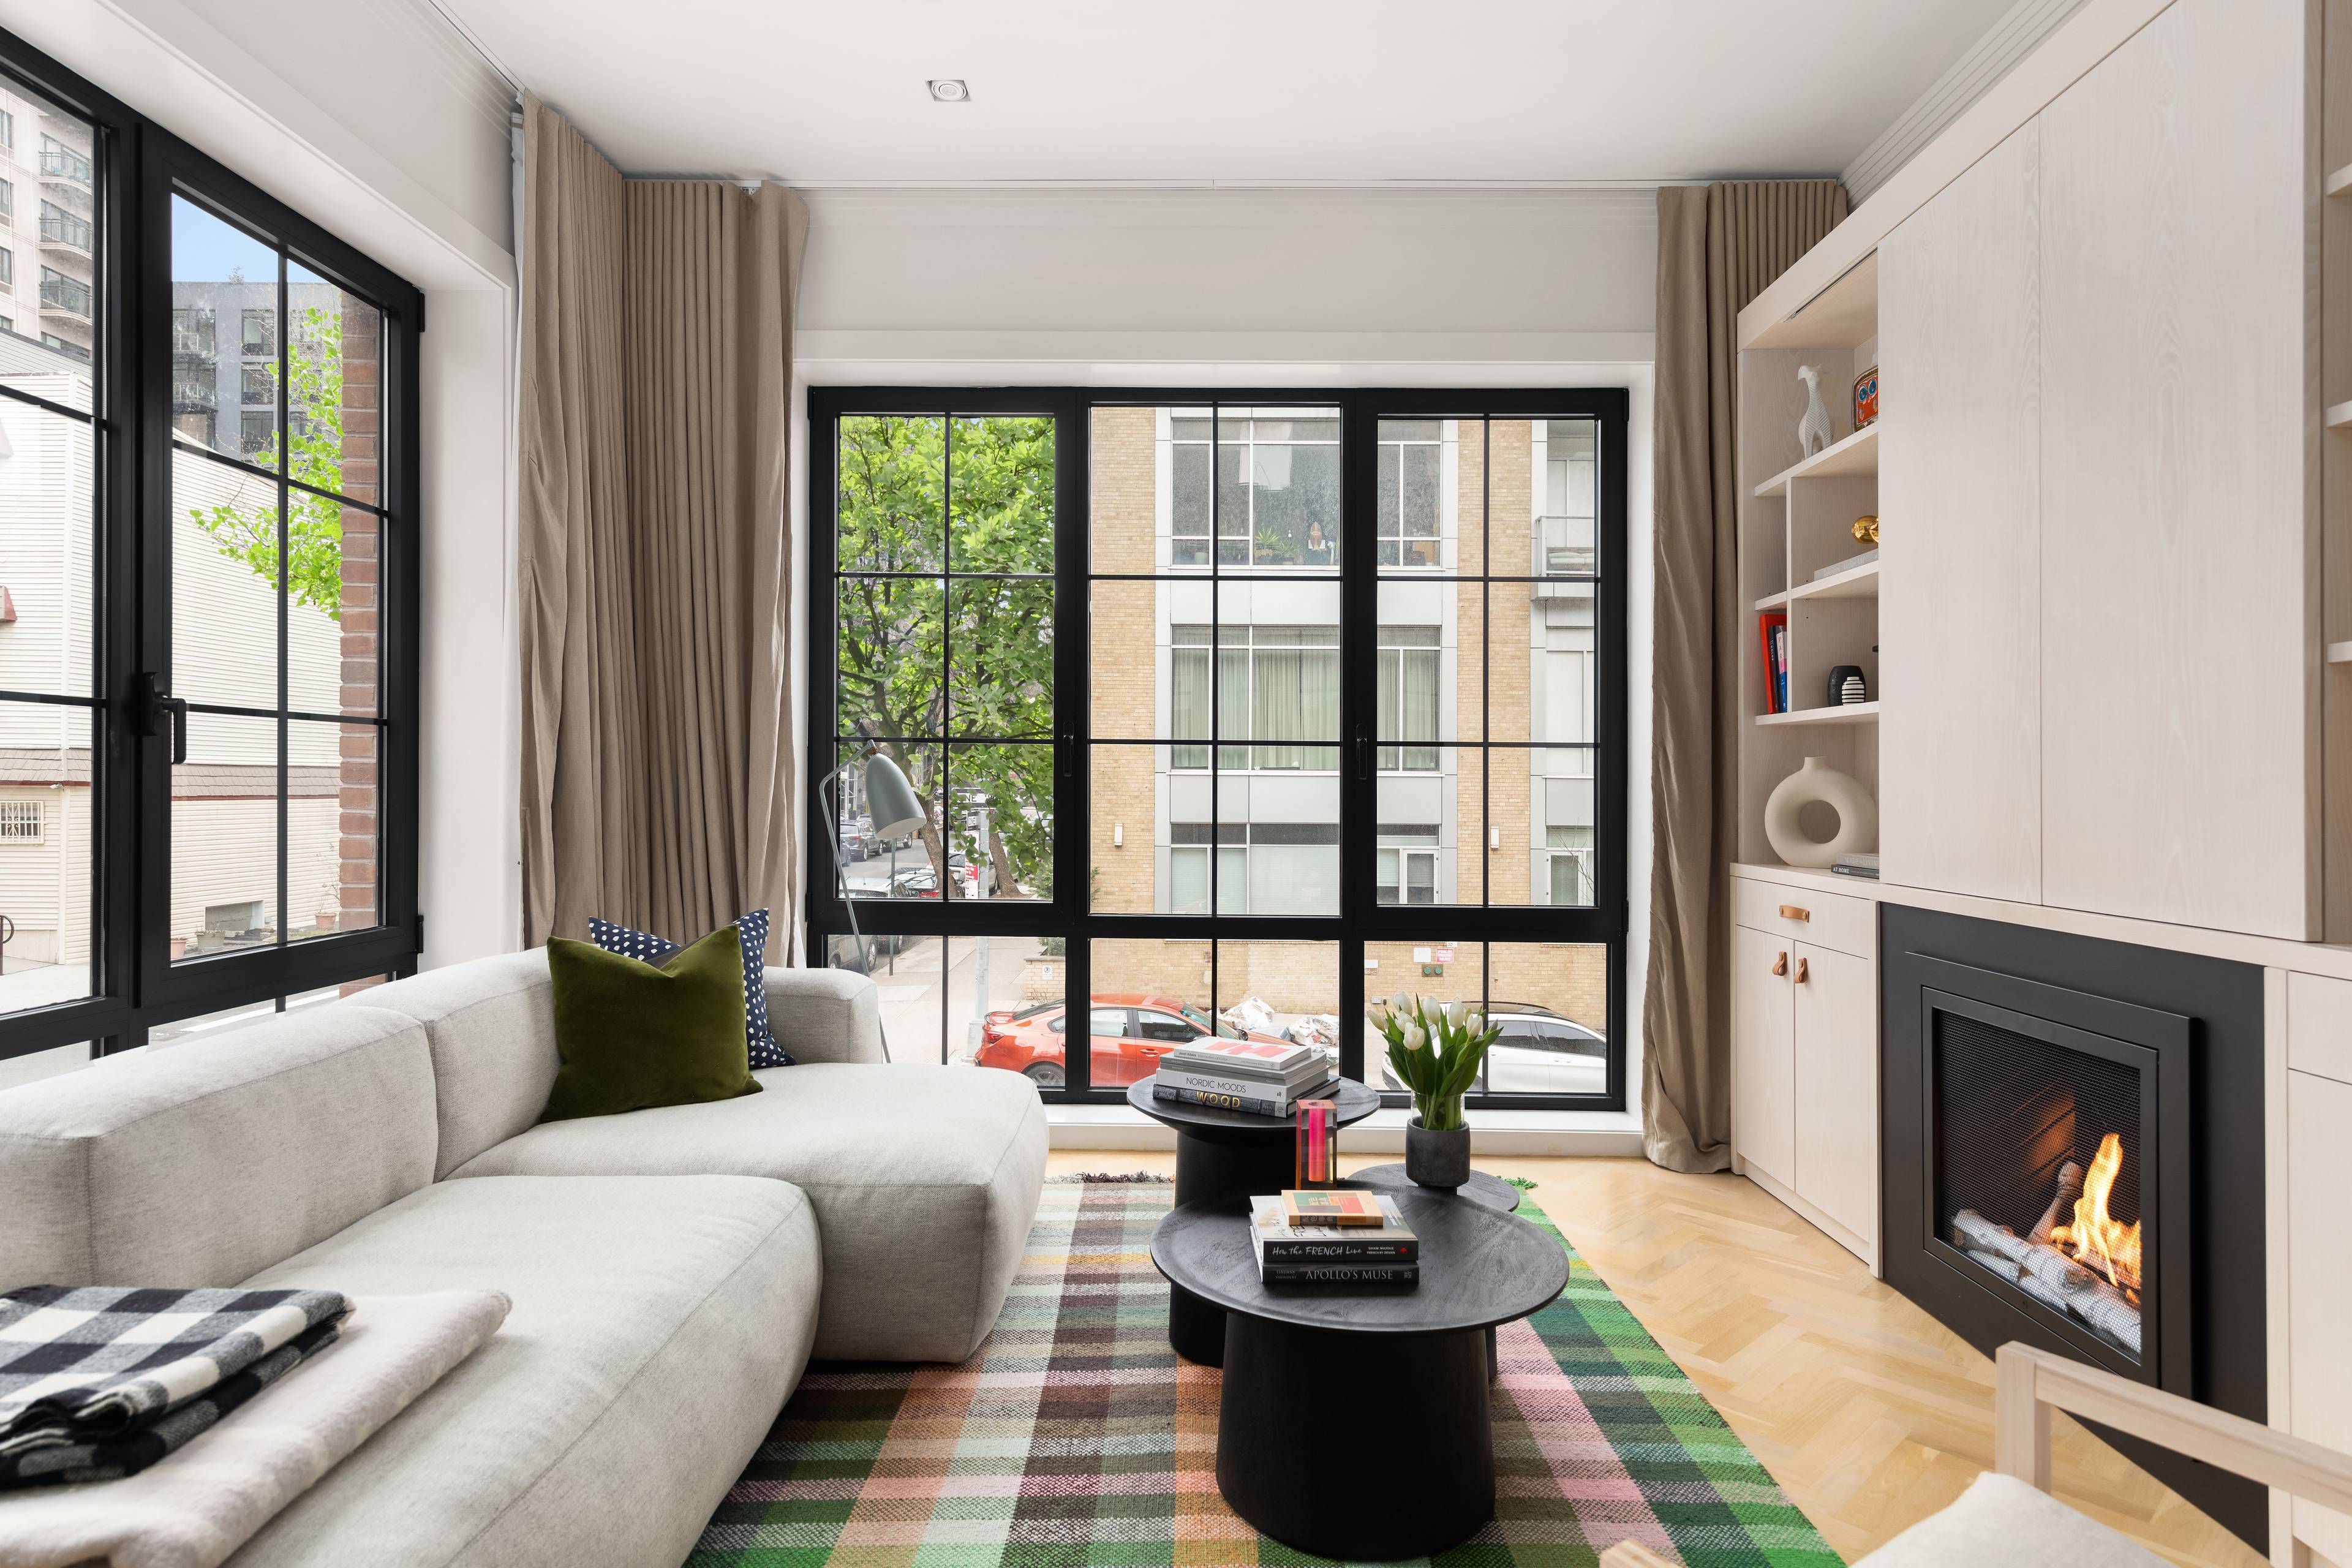 Designer finished corner condominium at the nexus of Downtown Brooklyn, DUMBO, Brooklyn Heights, and the Navy Yards, situated on a quiet and charming residential street.